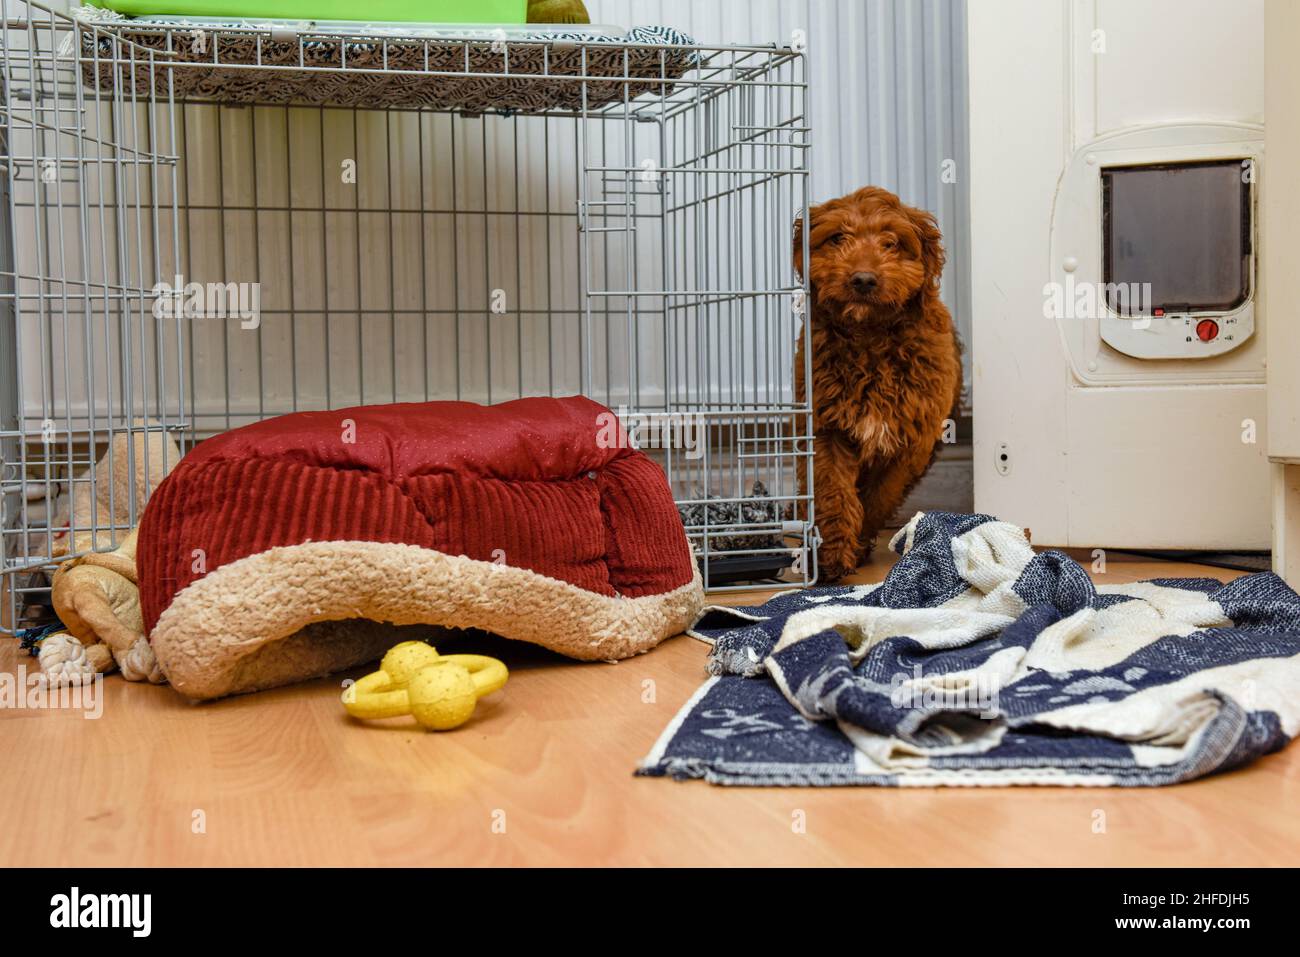 A dirty dog runs into a room and causes a mess Stock Photo